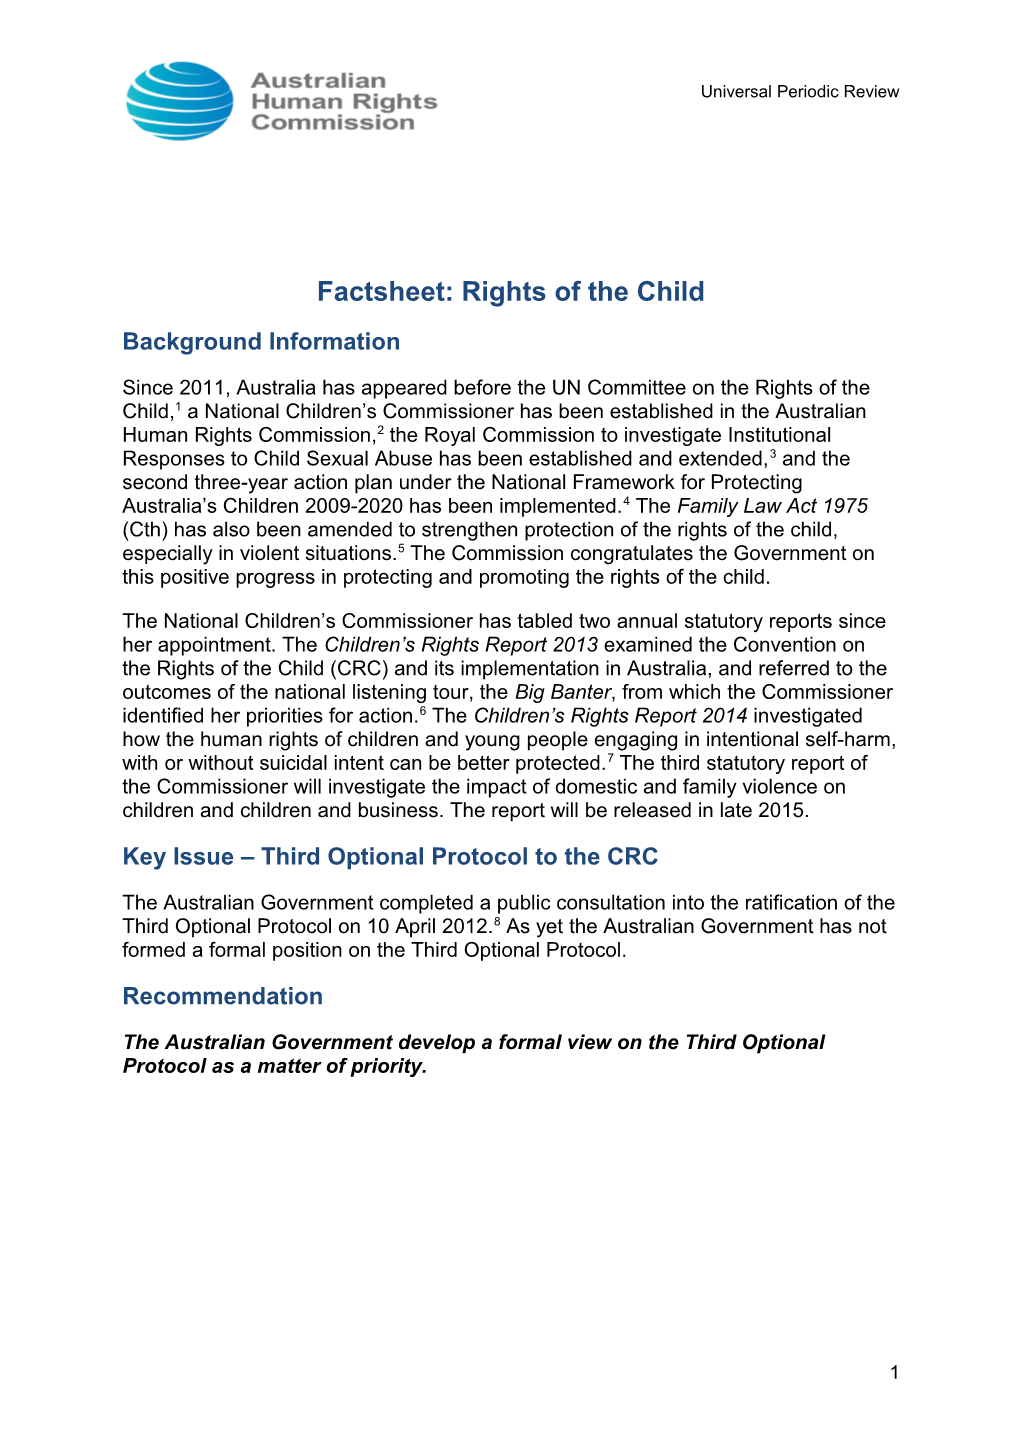 Factsheet: Rights of the Child